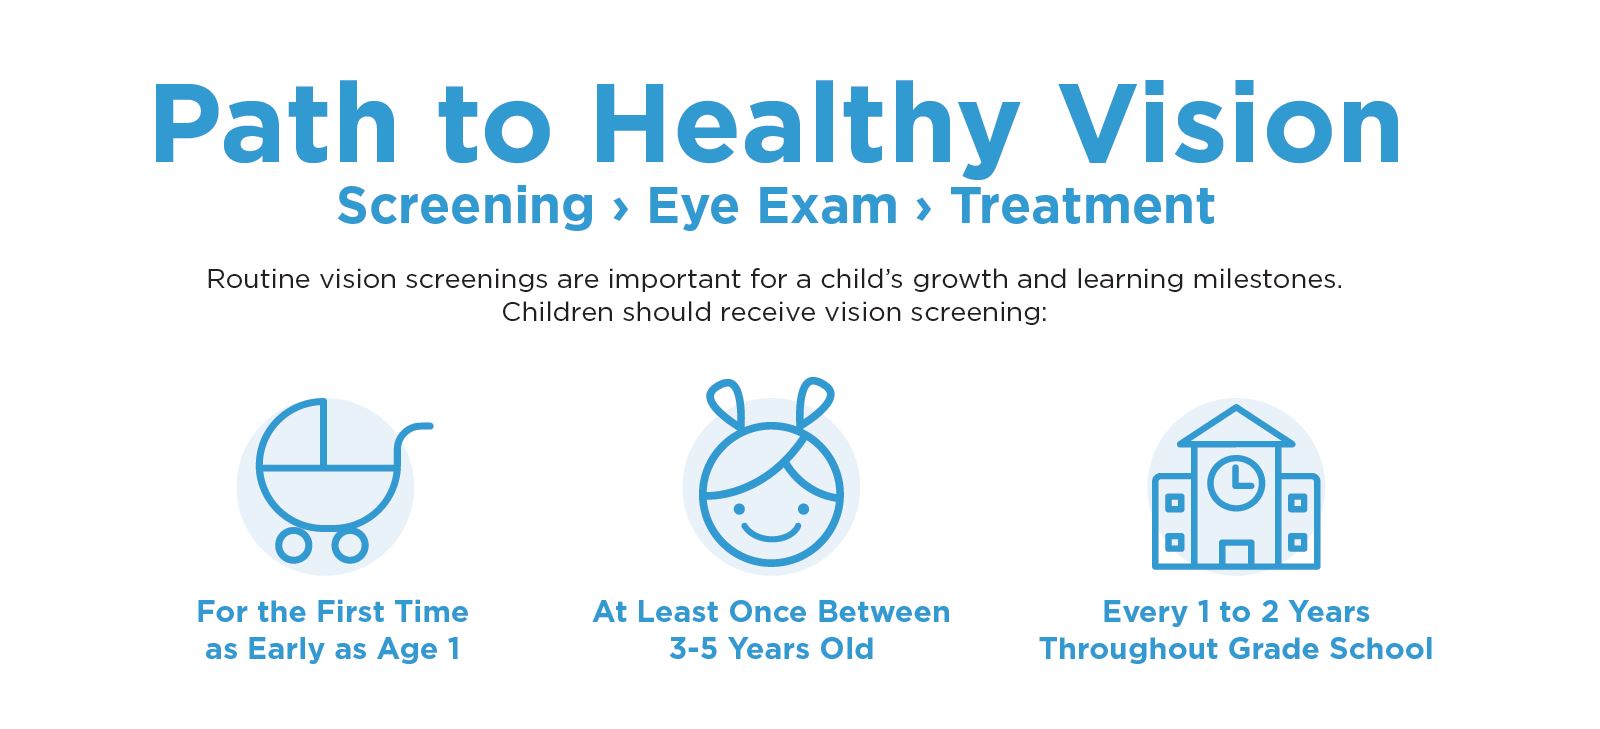 early vision screenings are important for vision health